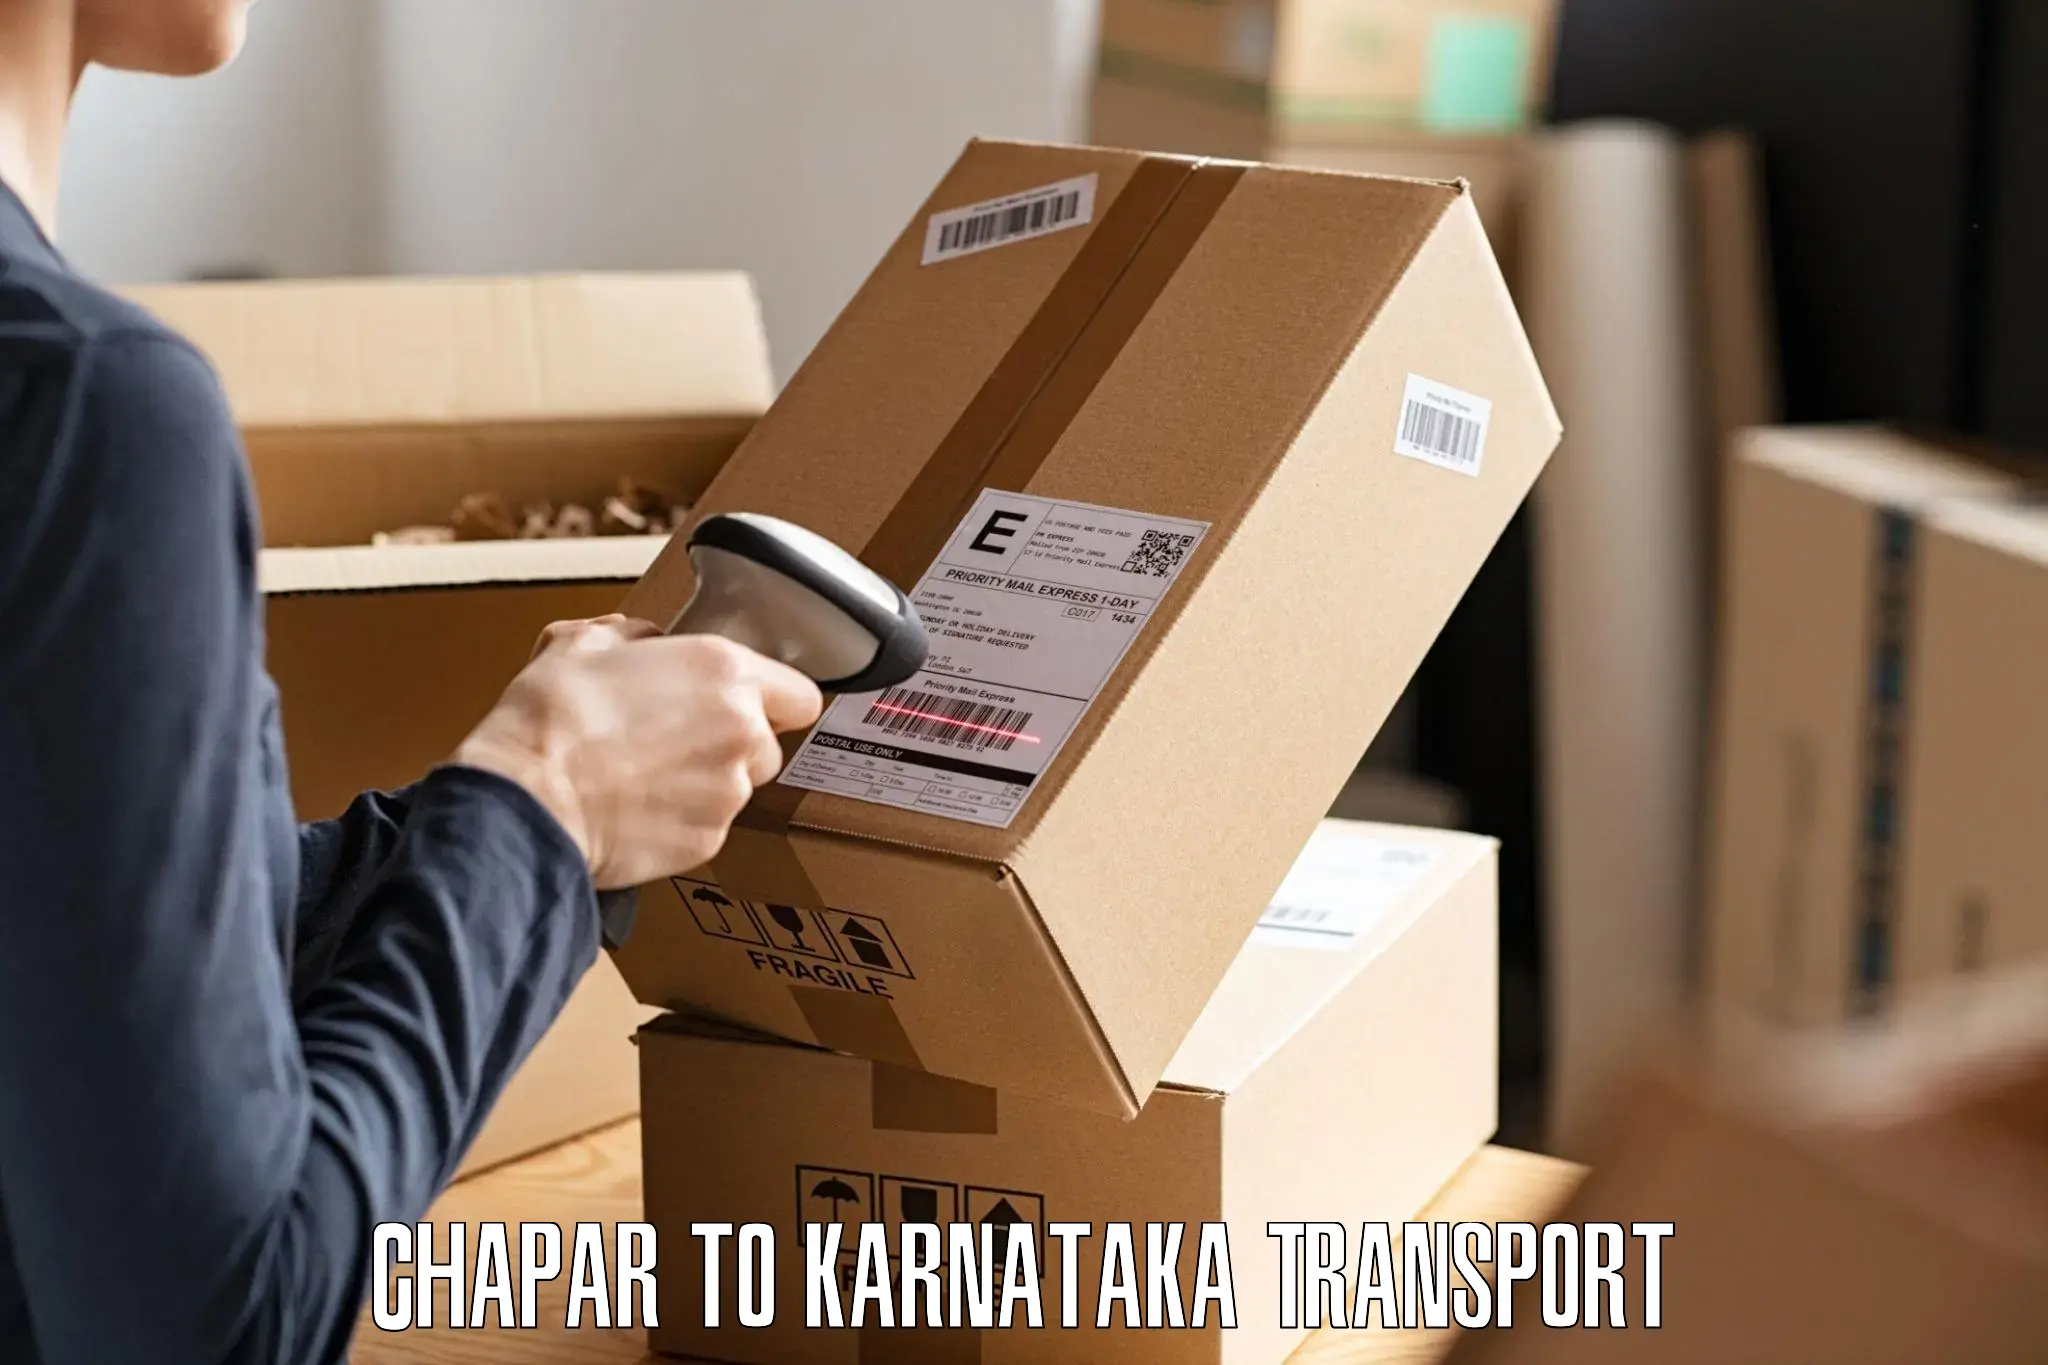 All India transport service Chapar to Channapatna